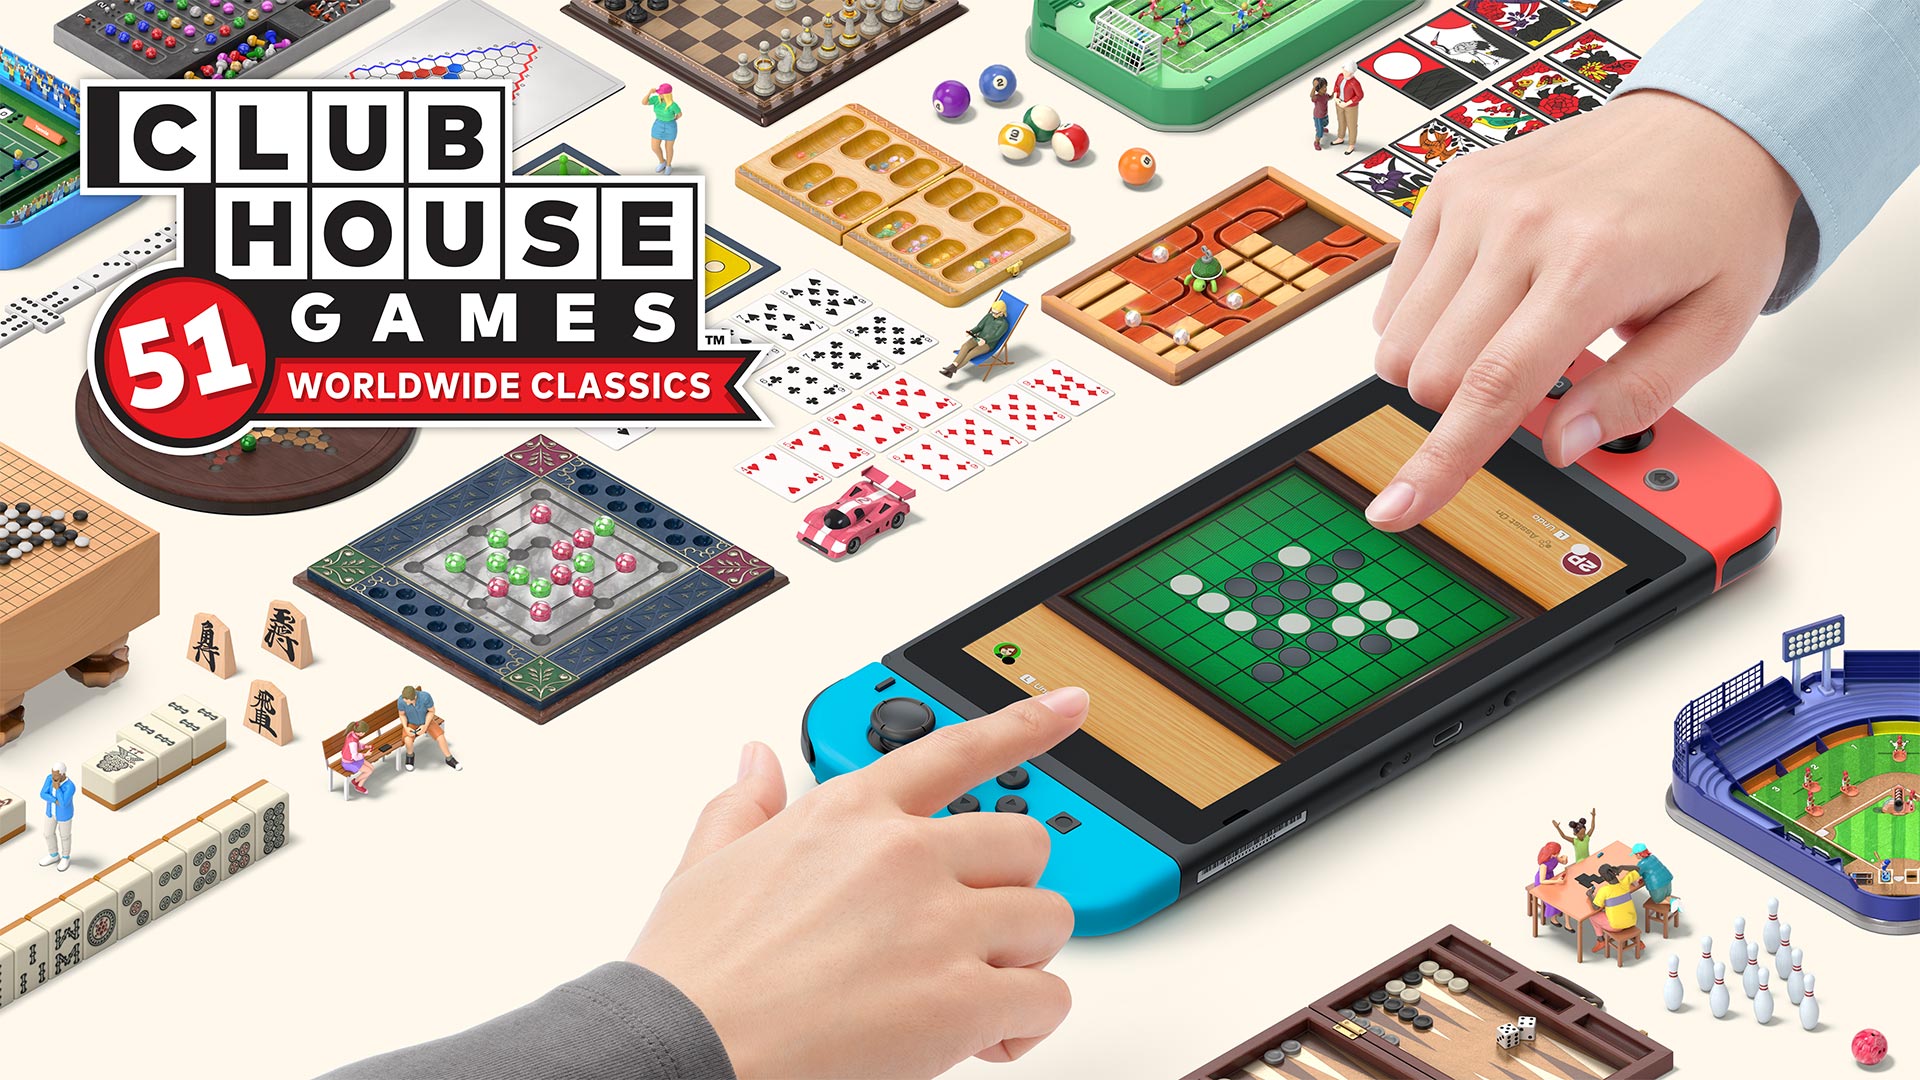 What are all the games in Clubhouse Games 51 Worldwide Classics? iMore